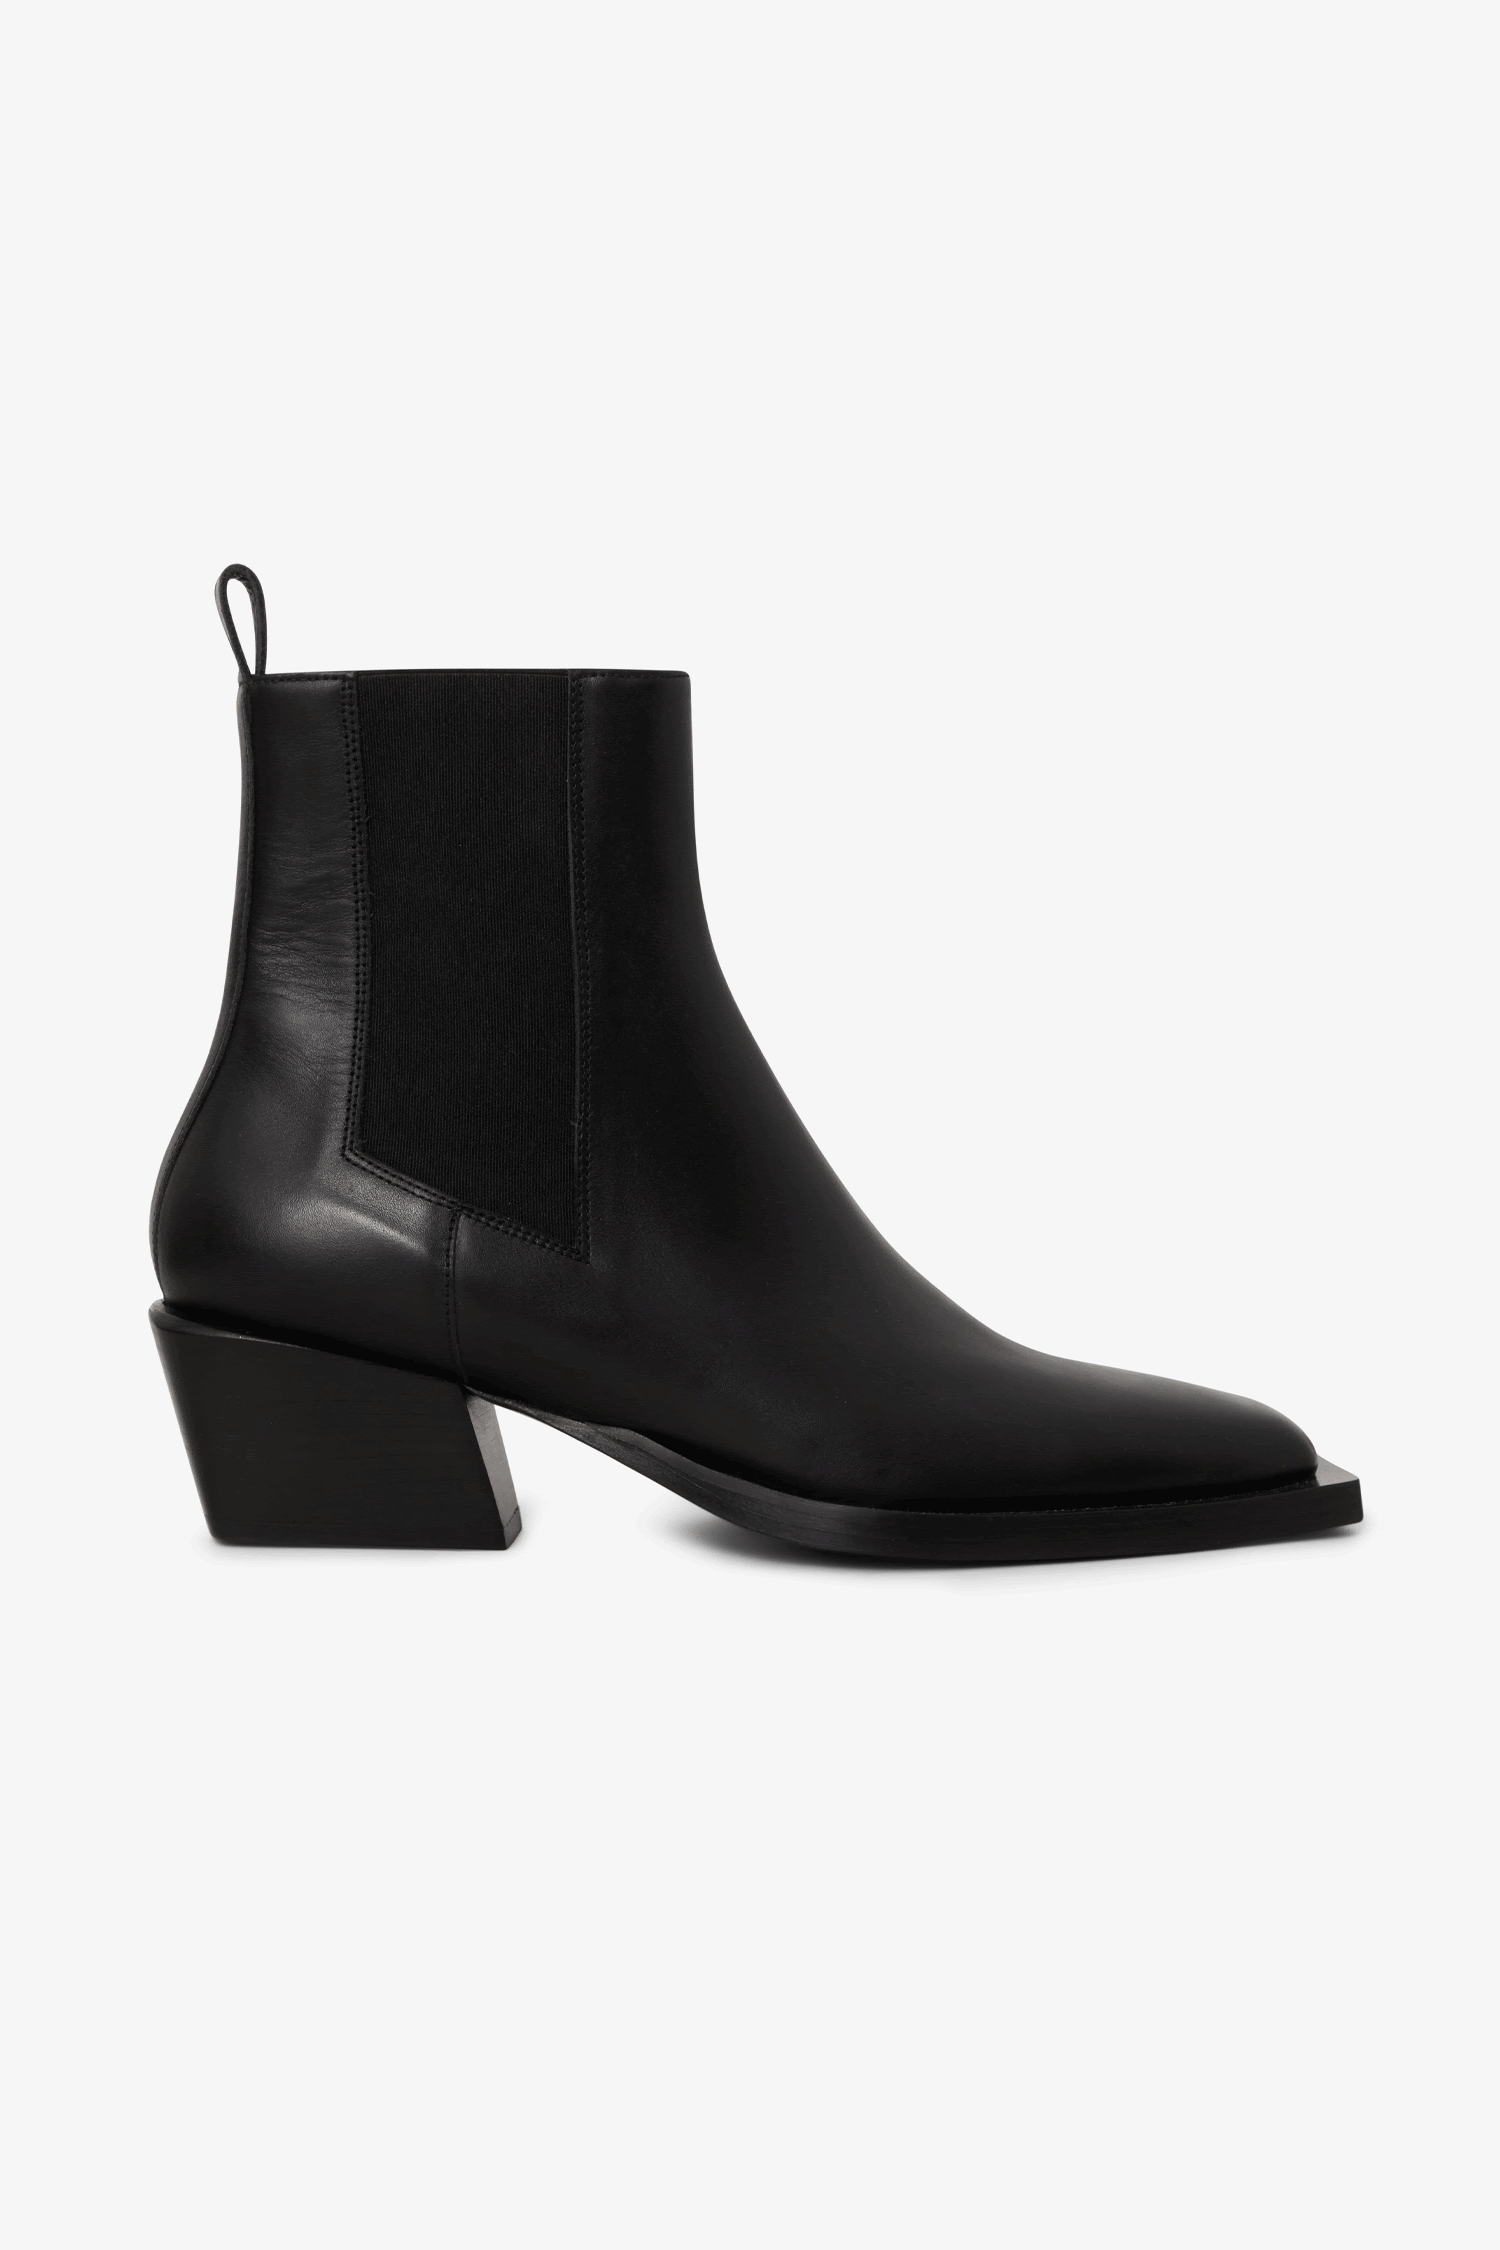 House of Dagmar - New Launch - The Square Toe Chelsea Boots - Pynck